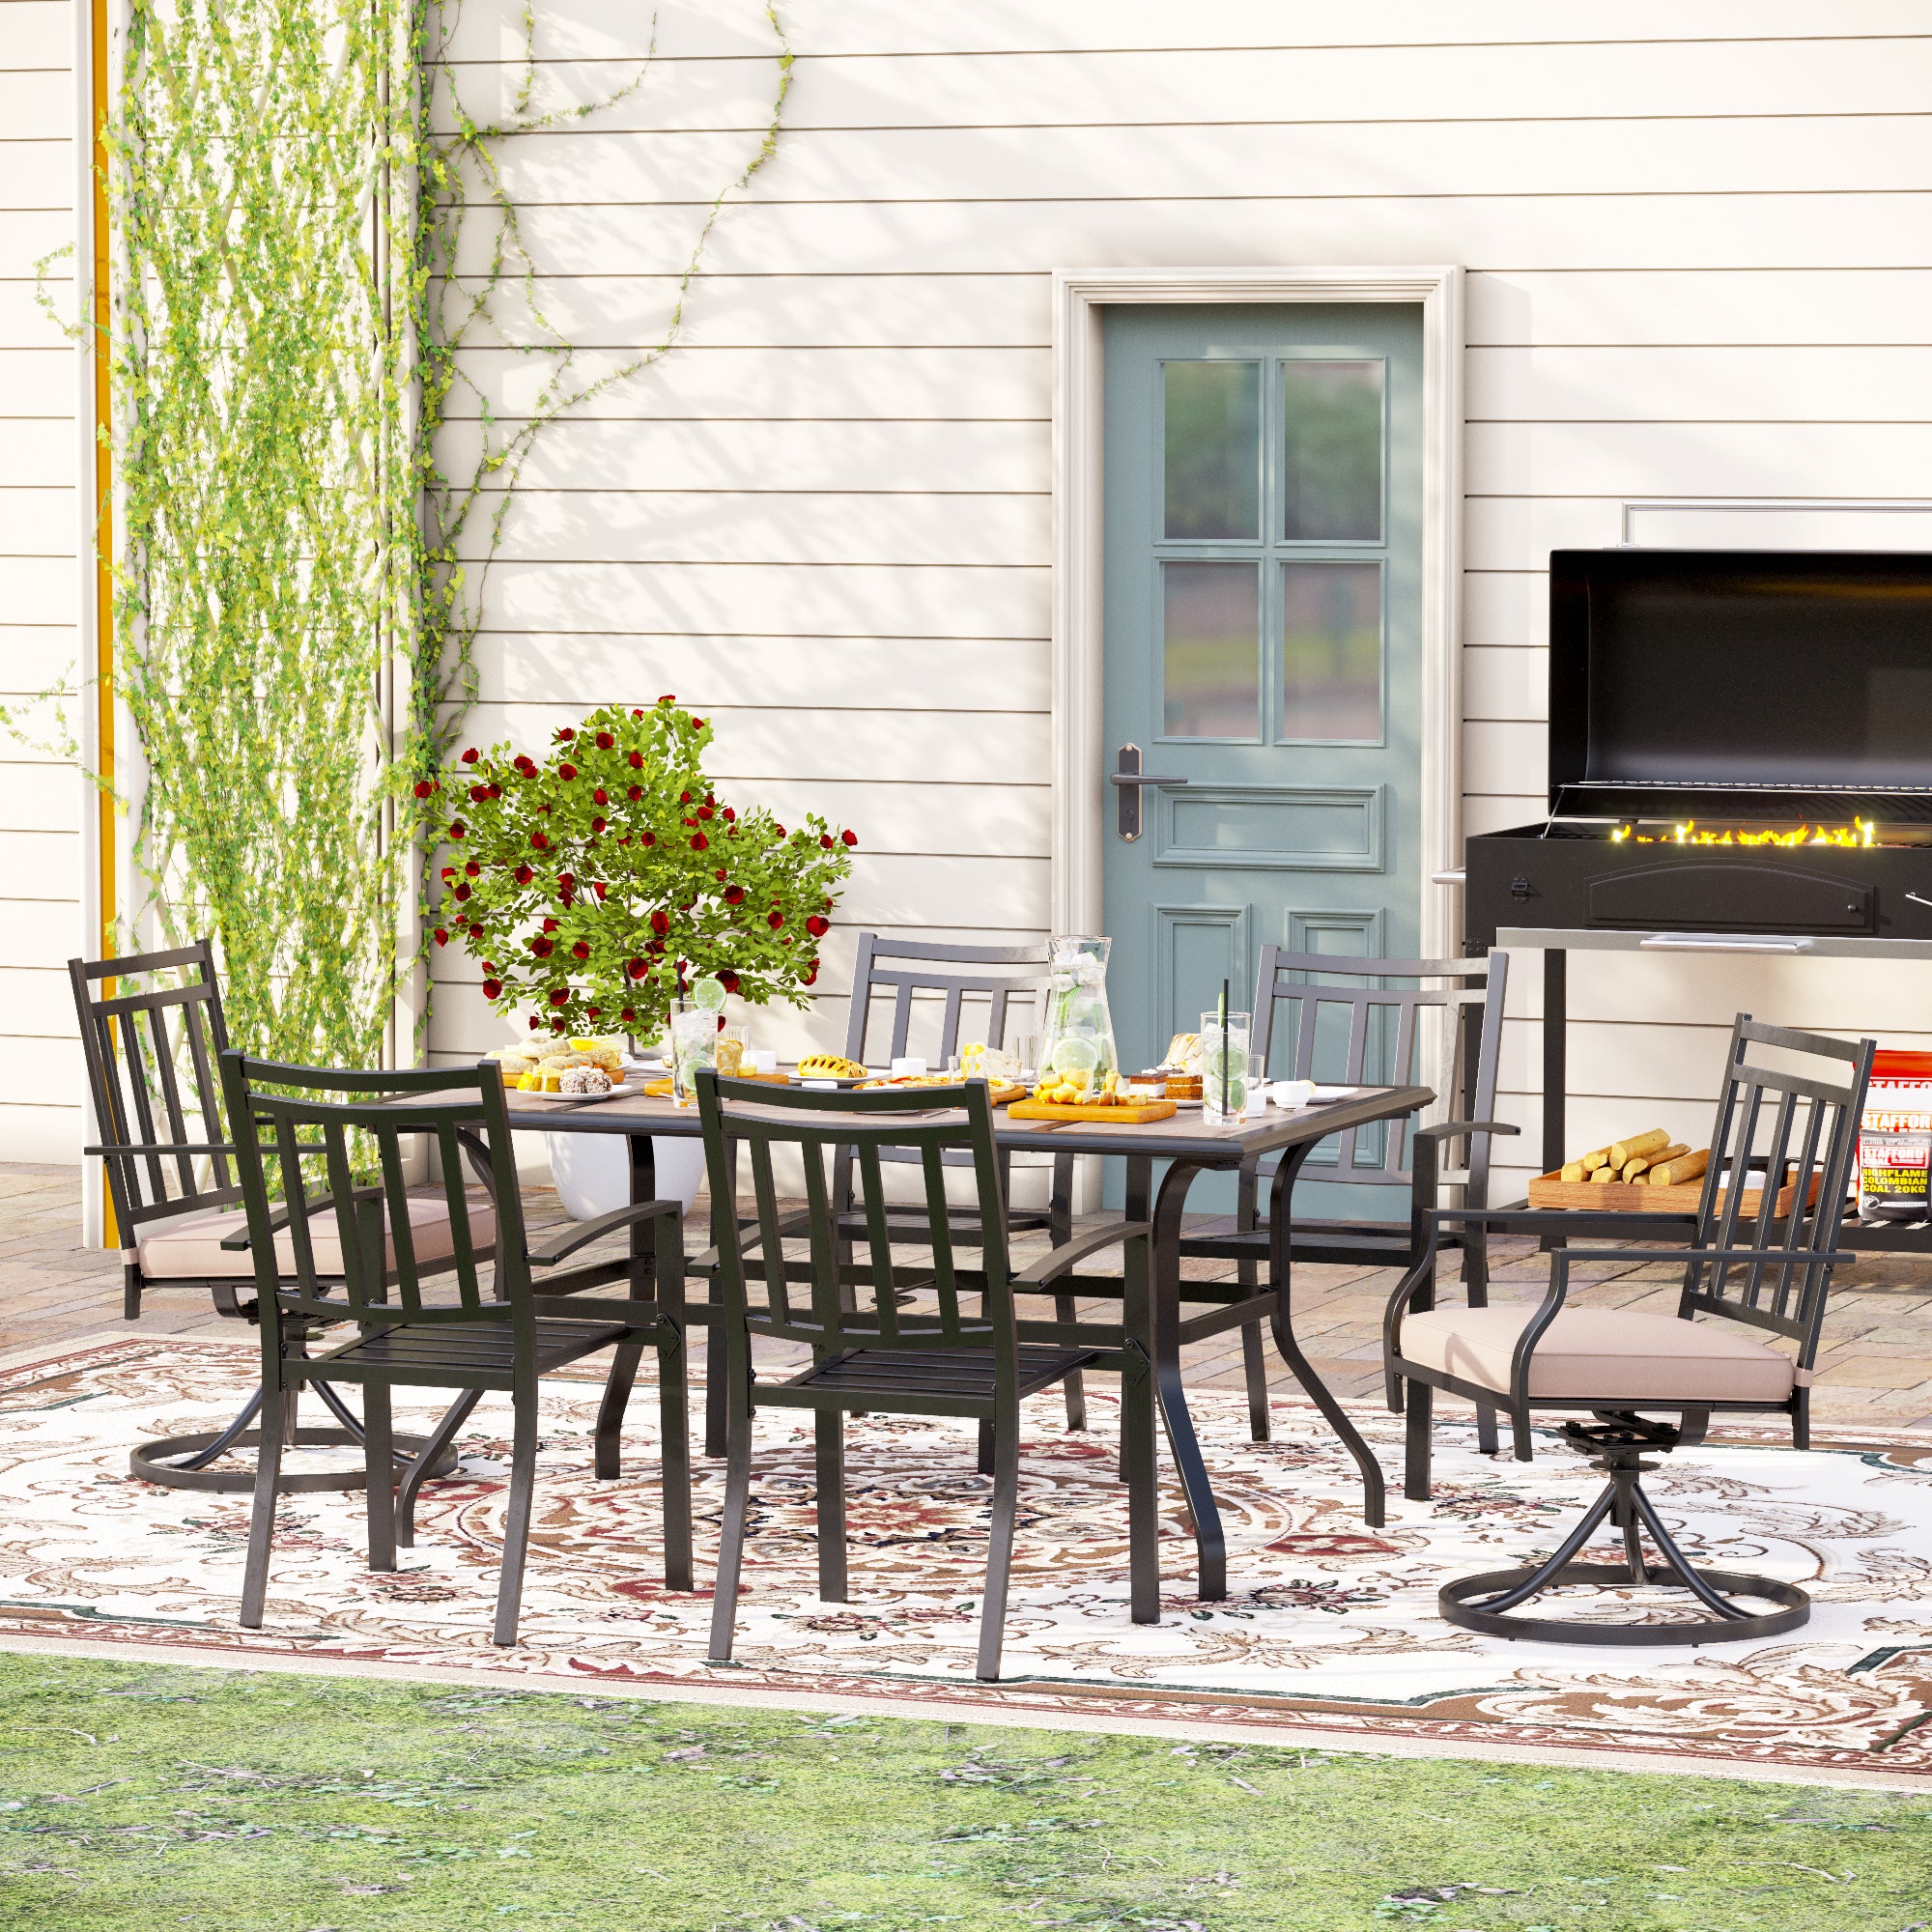 PHI VILLA Geometric Rectangle Table and Swivel Chairs 7-Piece Steel Outdoor Patio Dining Set